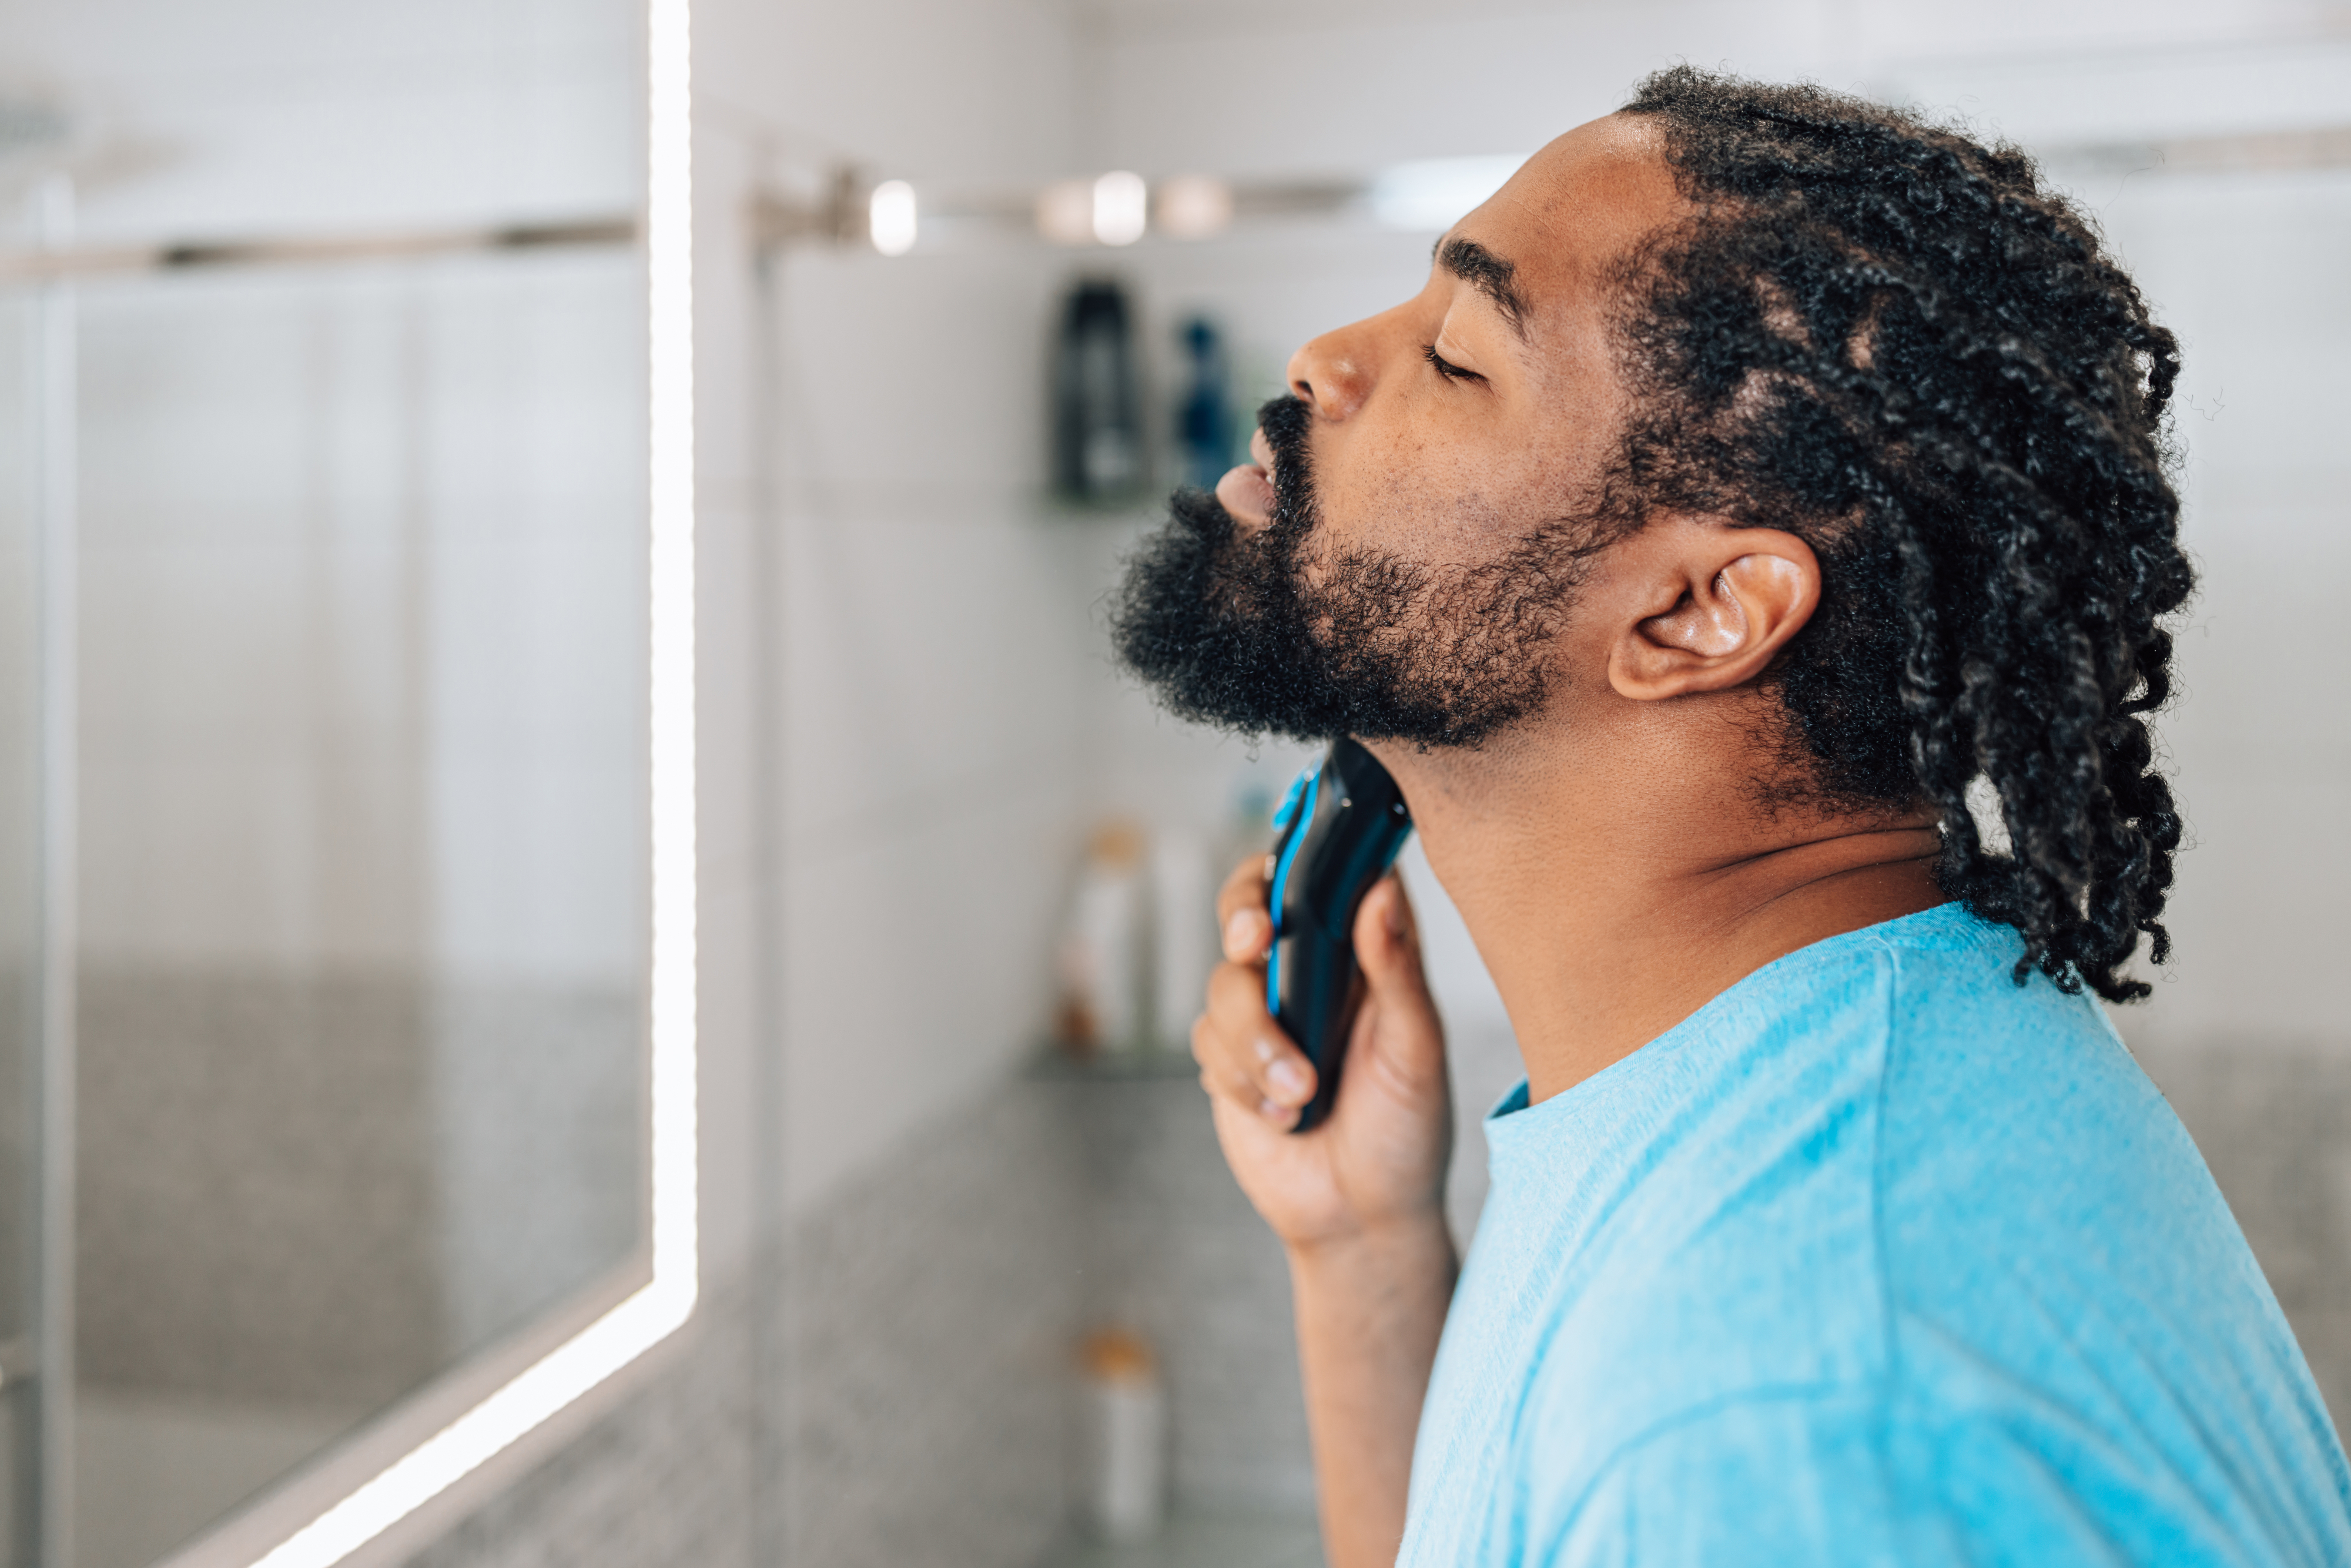 Man in a bathroom grooming his beard with an electric trimmer, wearing a blue shirt